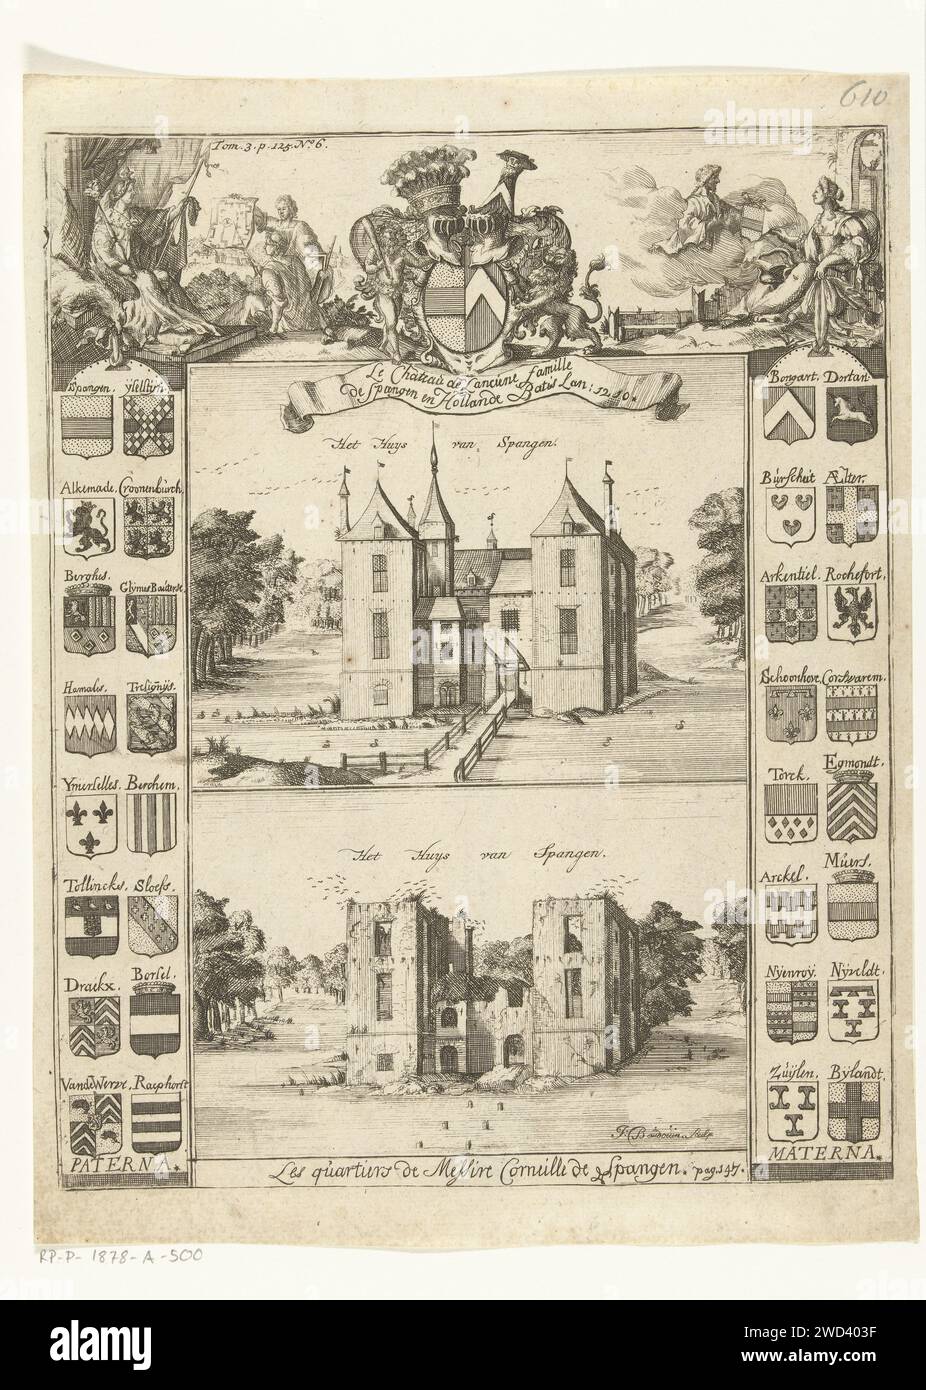 https://c8.alamy.com/comp/2WD403F/huis-van-spangen-i-baudouin-after-jacob-lois-after-1672-before-1730-print-two-performances-with-the-house-of-spangen-above-each-other-above-the-house-in-good-times-below-as-ruin-on-both-sides-32-family-weapons-to-the-left-of-the-side-of-spangen-to-the-right-of-the-side-of-bongart-above-the-composite-weapon-of-the-spangen-and-bongart-families-and-two-allegorical-scenes-on-the-left-an-architect-who-shows-a-map-of-a-queen-on-the-right-a-lady-who-draws-the-spangen-family-crest-with-a-writing-spring-under-a-reference-to-cornelis-van-spangen-paper-etching-castle-ruin-of-a-dwelling-2WD403F.jpg